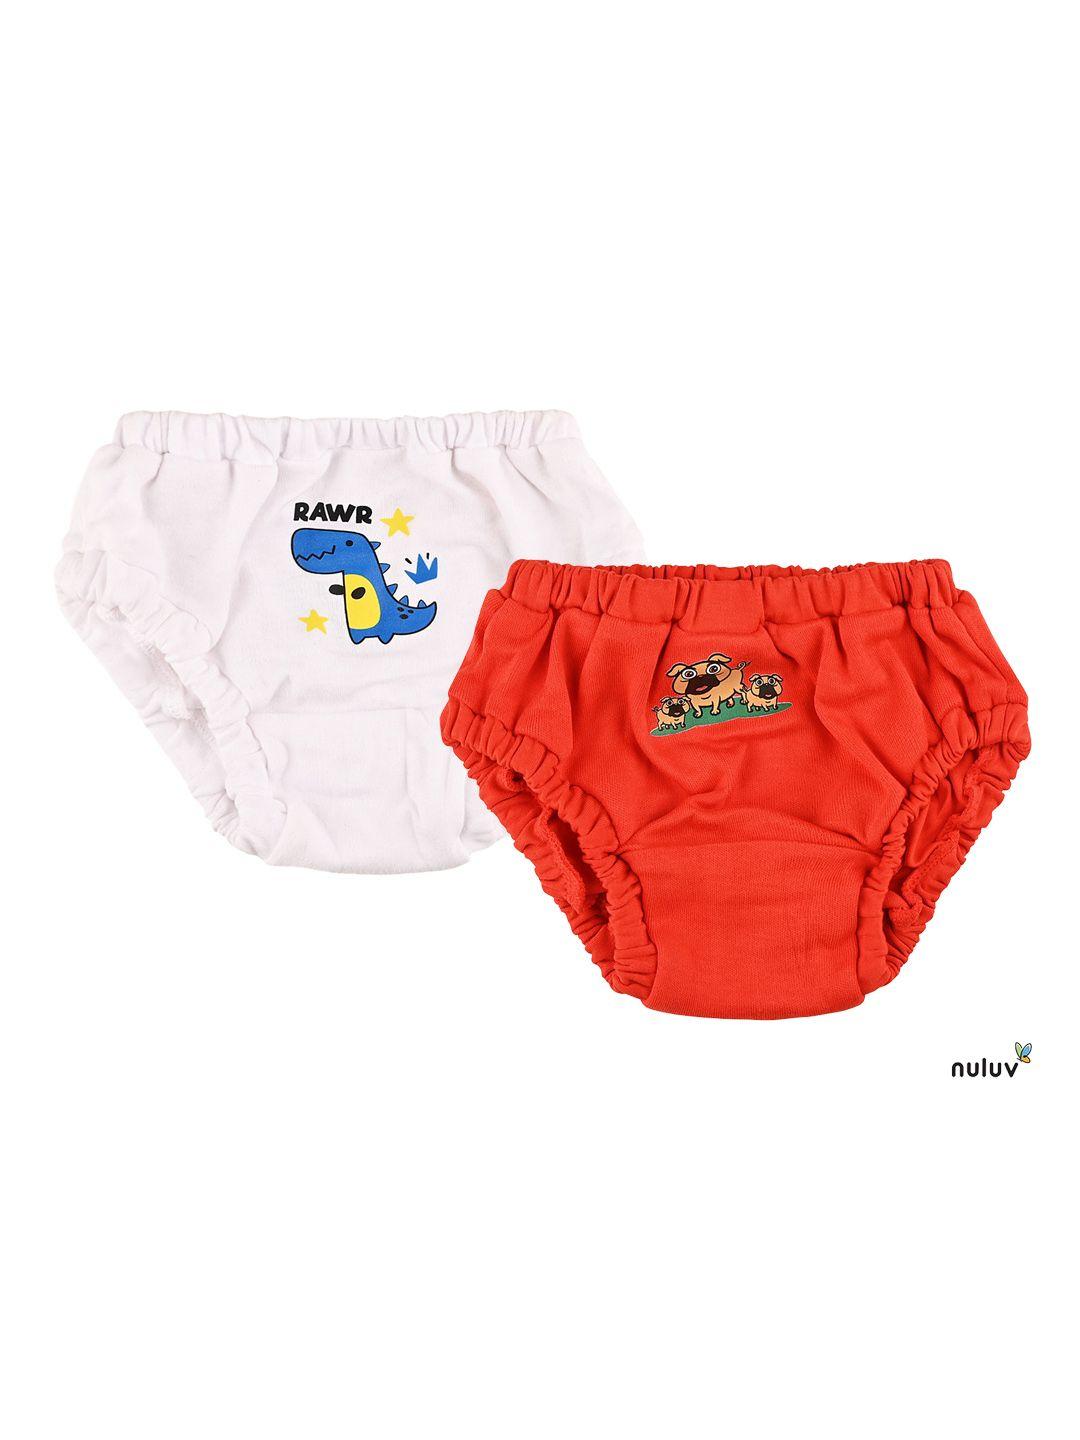 nuluv-boys-pack-of-2-printed-pure-cotton-basic-briefs-nlinfbi2005